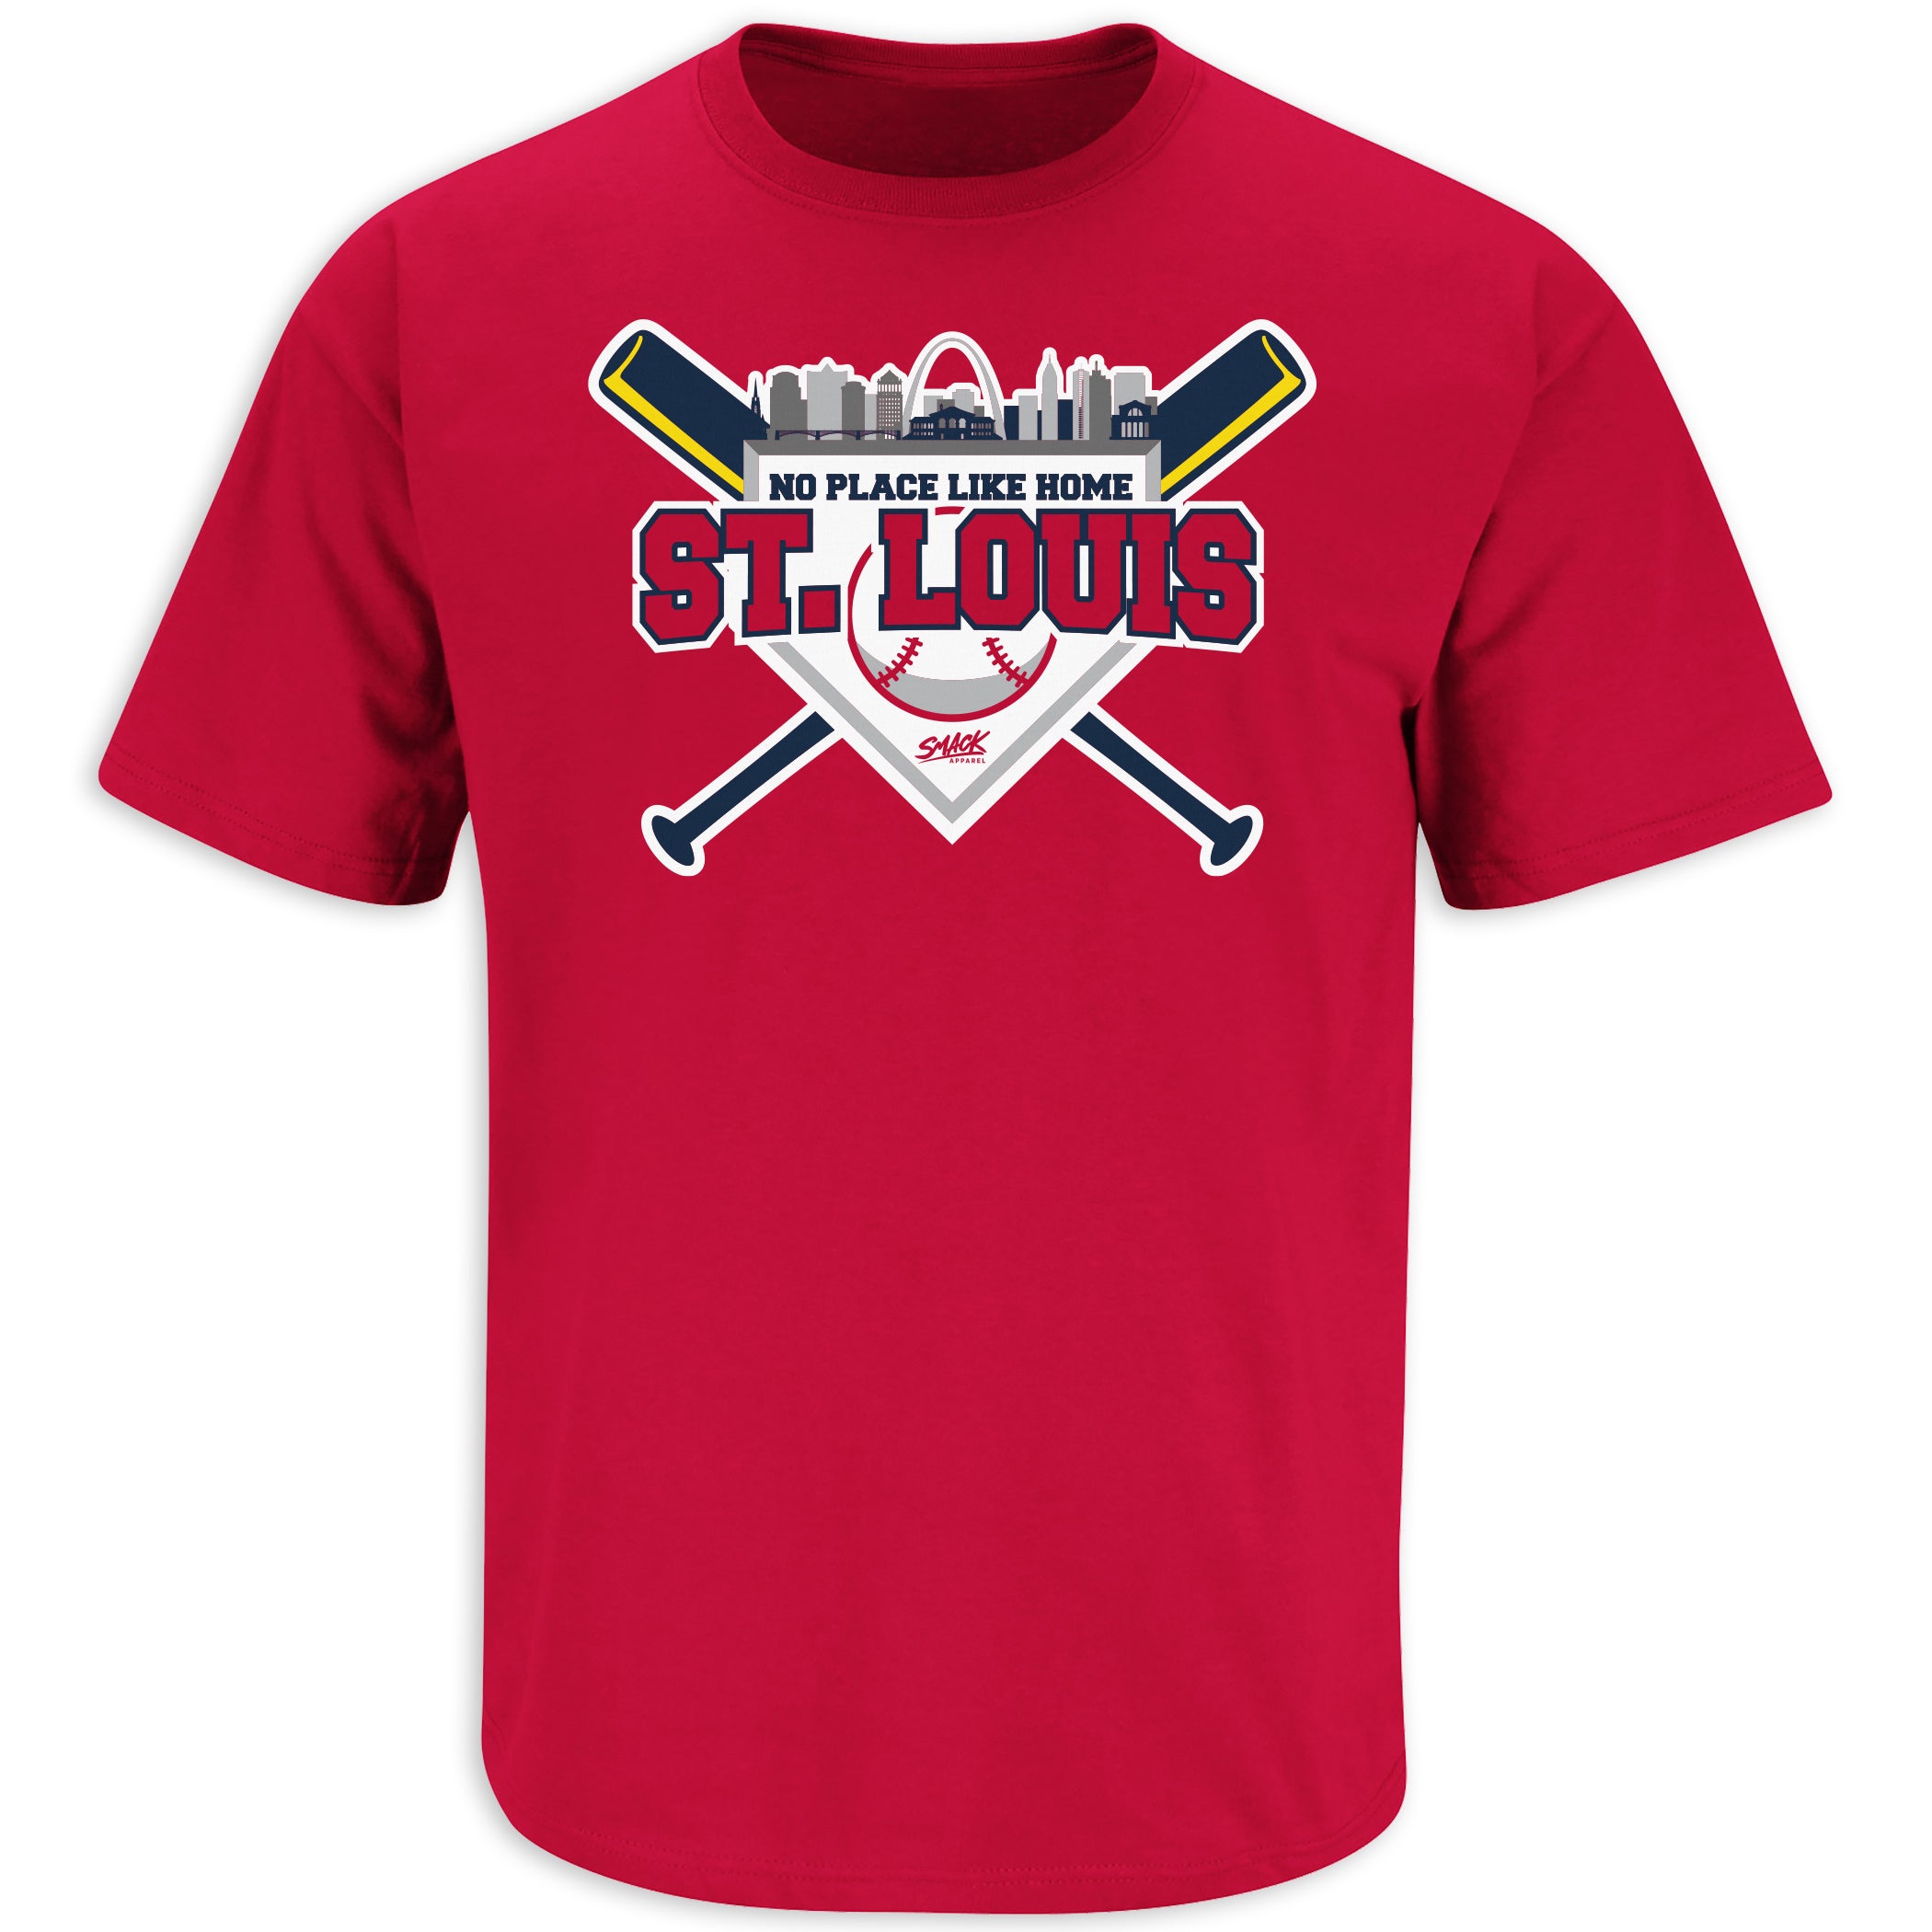 Smack Apparel No Place Like Home T-Shirt for St. Louis Baseball Fans, Short Sleeve / 5XL / Red